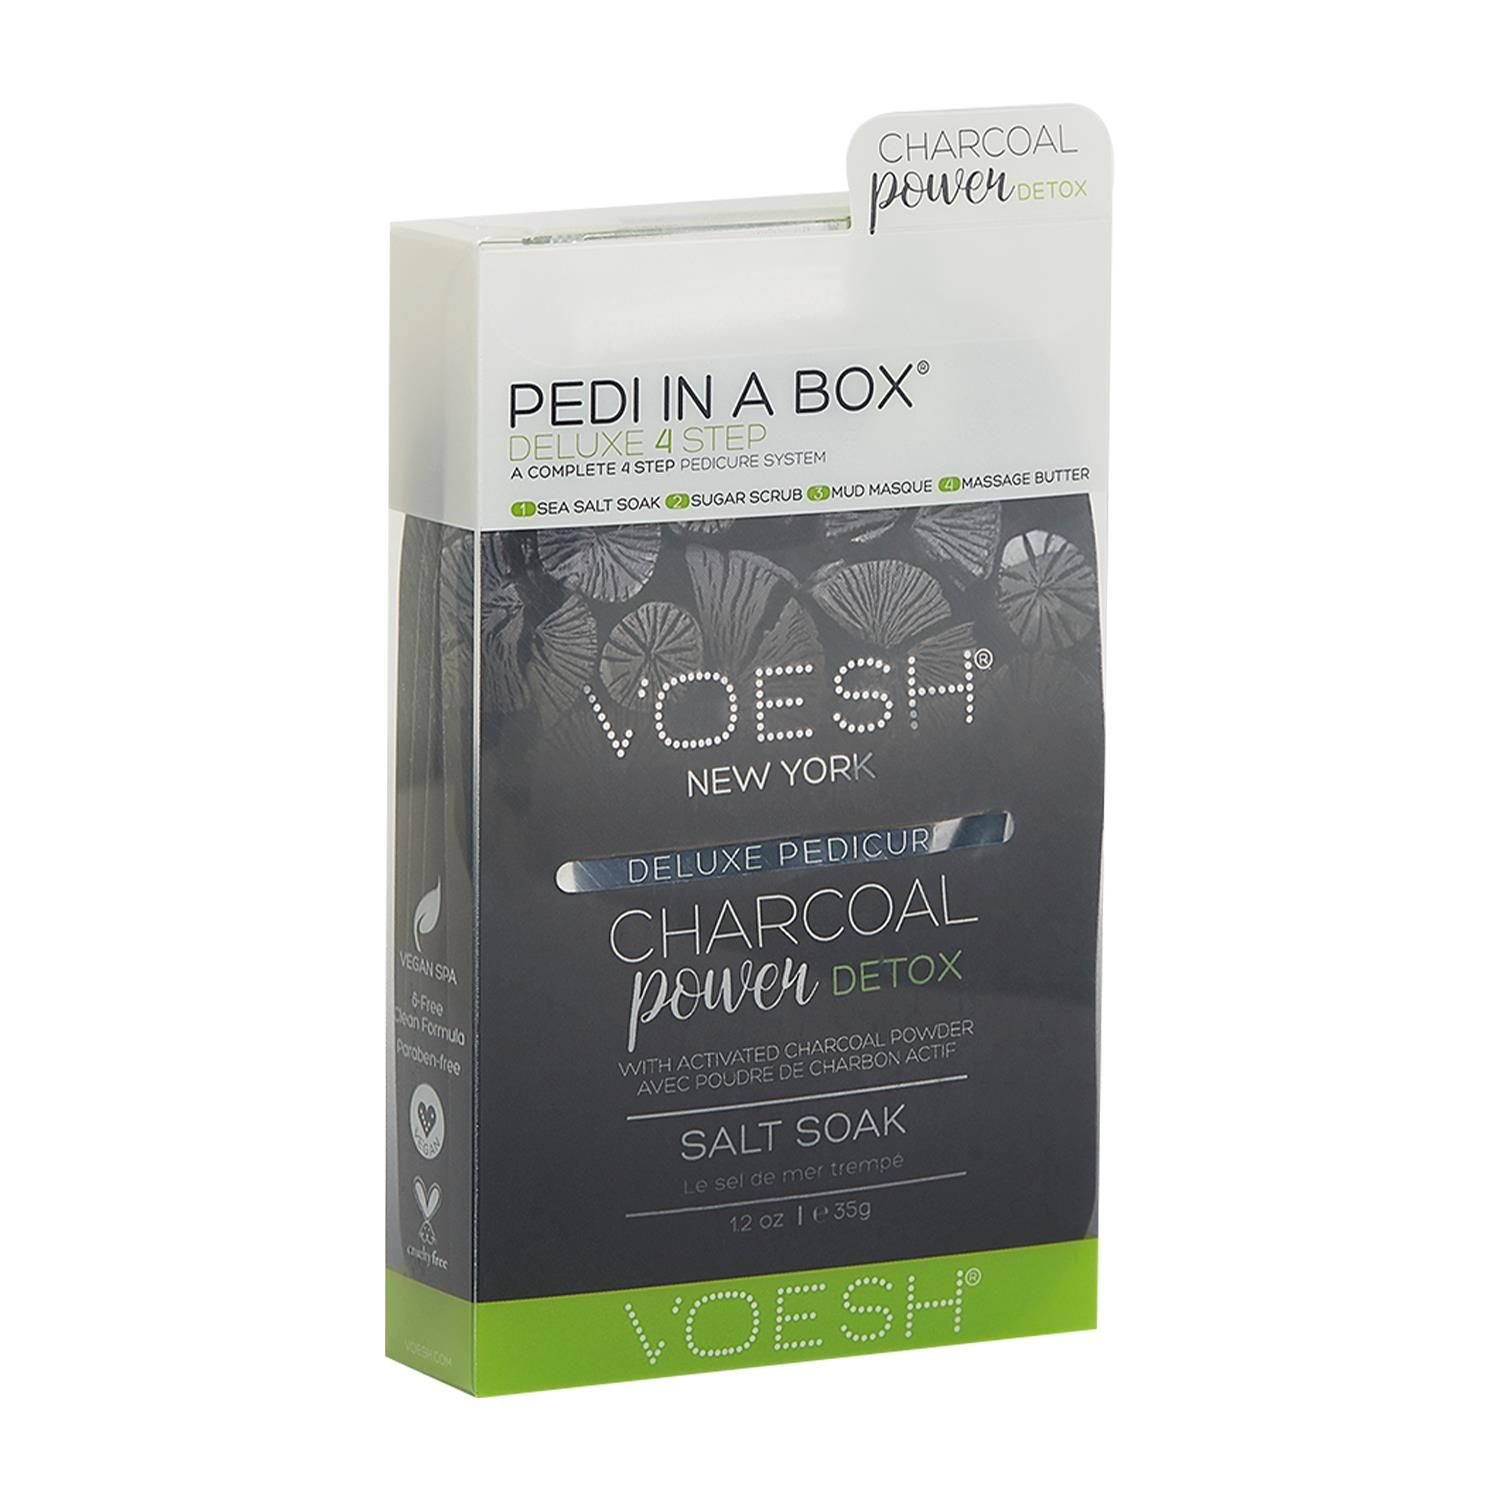 Voesh Charcoal Power Detox Deluxe 4Step Pedicure In A Box with Charcoal Extract.   The Cleanest And Most Hygienic Spa Pedicure Solution. Enriched With Key Ingredients To Give Your Feet The Nutrition It Needs. Each Product Is Individually Packed With The Right Amount For A Single Pedicure.

The Perfect Pedi For:
DIY At-Home Pedicure
Date Night
Bachelorette Parties
Girls’ Night In

The kit contains:
Sea Salt Soak: This soak helps relieve tension, stiffness, minor aches and discomfort in your feet. It helps detox and deodorize the feet.
Sugar Scrub: The scrub gently exfoliates dead skin cells and helps soften your feet. Perfect for use on the soles on your feet.
Mud Masque: The masque removes deep-seated impurities in your skin leaving your feet feeling clean and revived.
Massage Cream: The massage cream hydrates and soothes skin. It softens the soles of your feet and helps prevent dryness and roughness.

4 Step Includes
Sea Salt Soak 35g: to detox & deodorize the feet.
Sugar Scrub 35g: to gently exfoliate dead skin.
Mud Masque 35g: to deep cleanse impurities.
Massage Butter 35g: to hydrate and soothe skin.